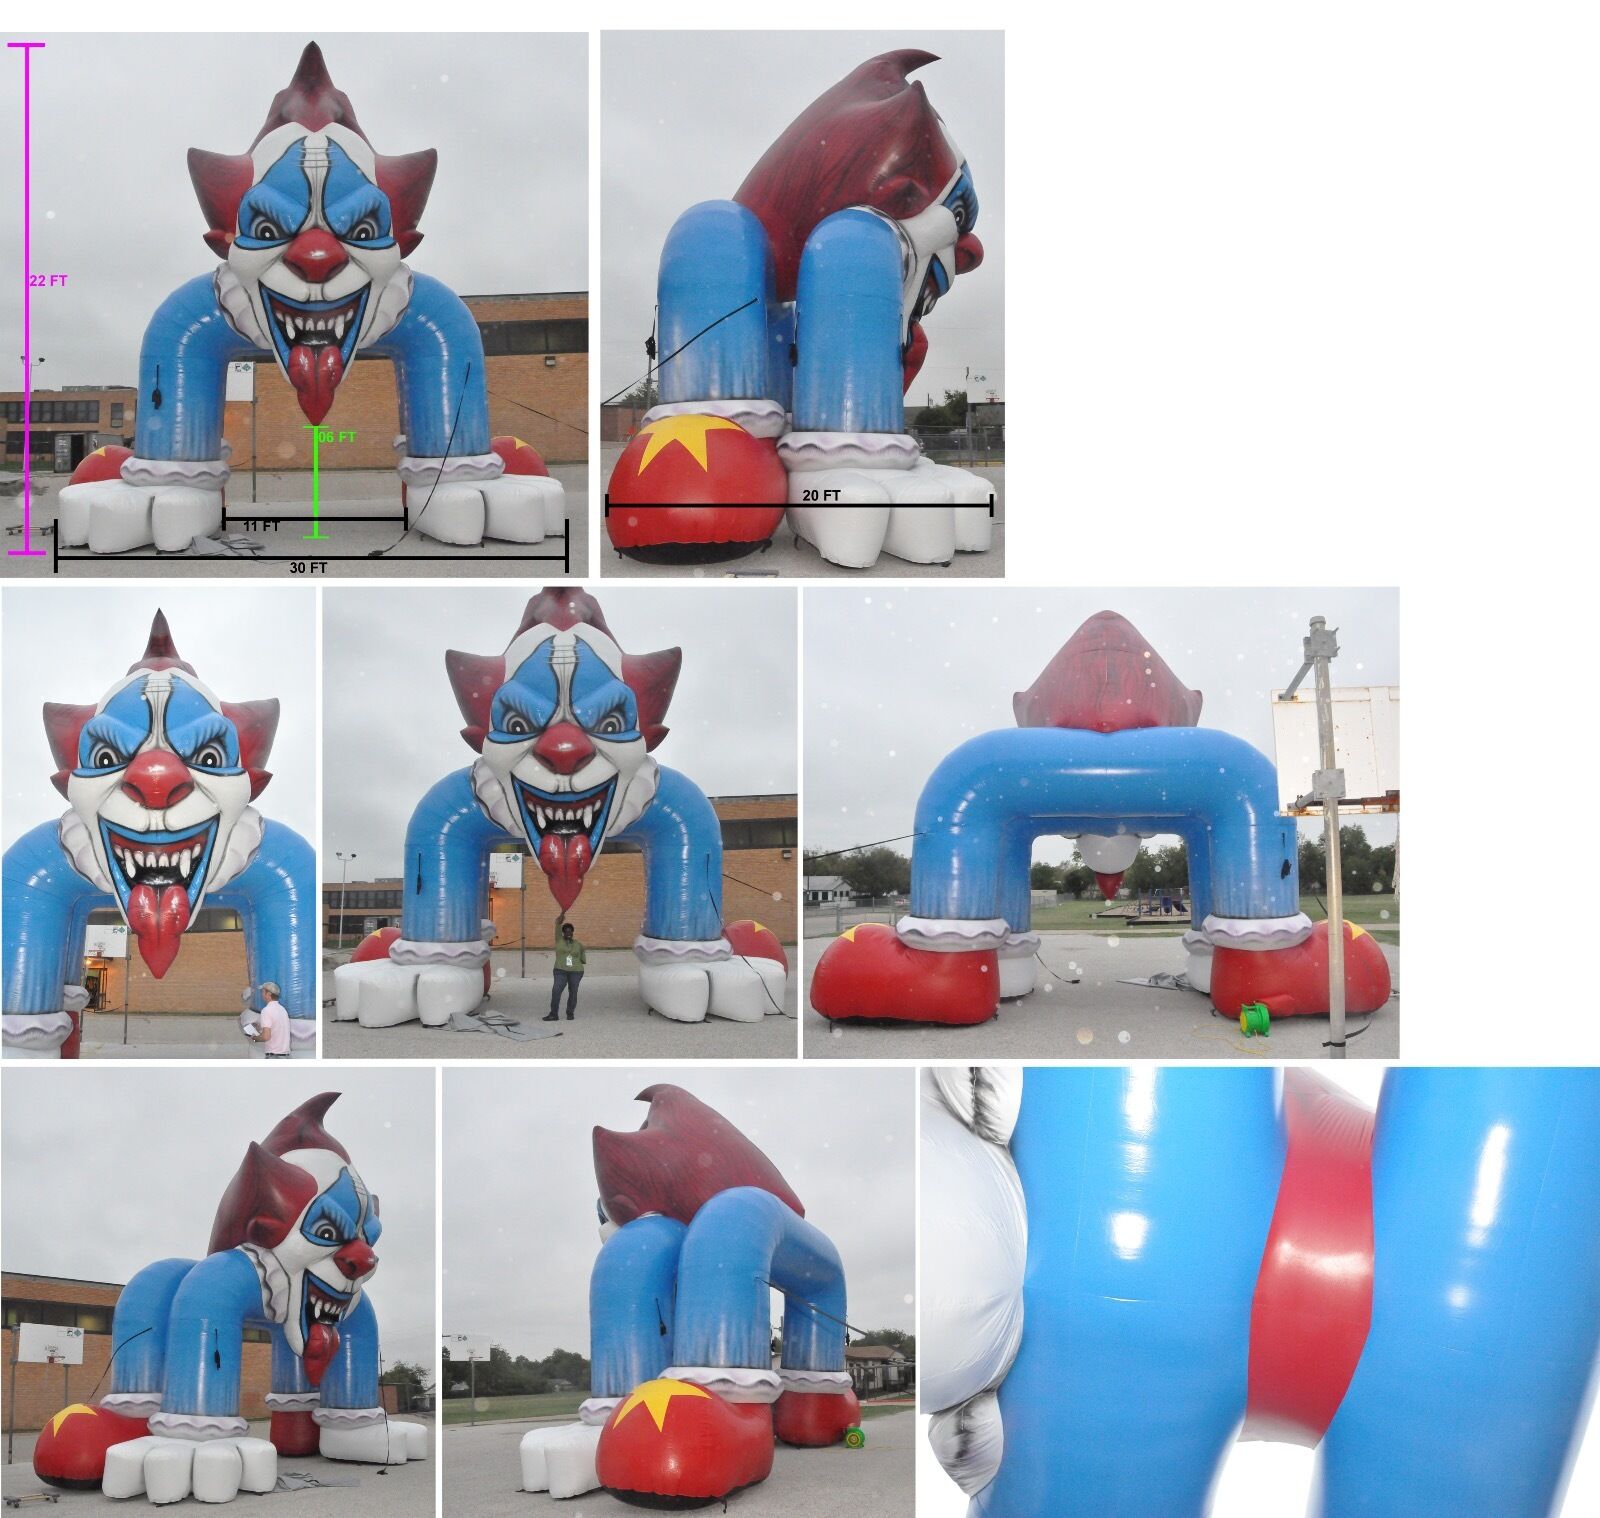 22' GIANT SCARY HALLOWEEN CLOWN- Revised Price, Firm